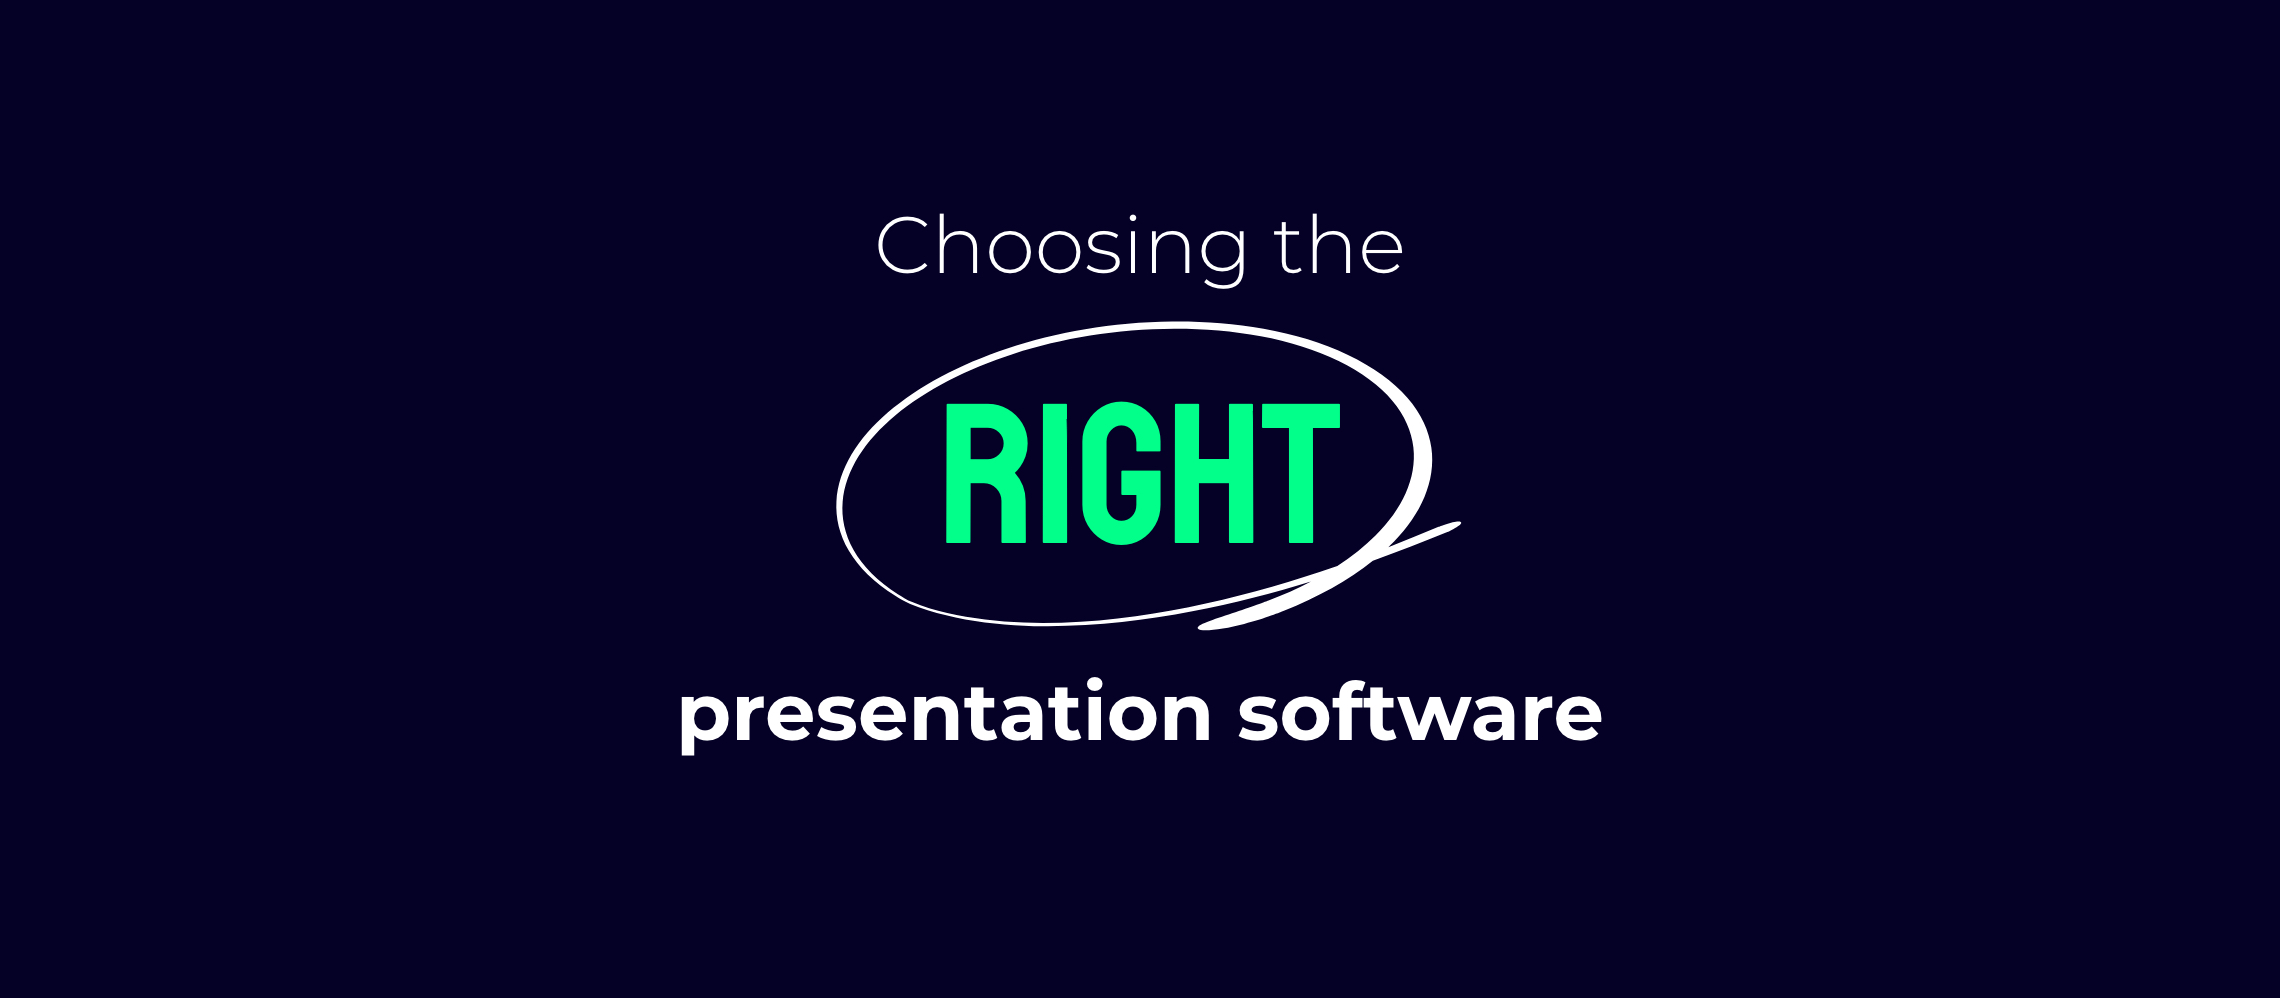 Presentation software: Choose the right experience for your audience.